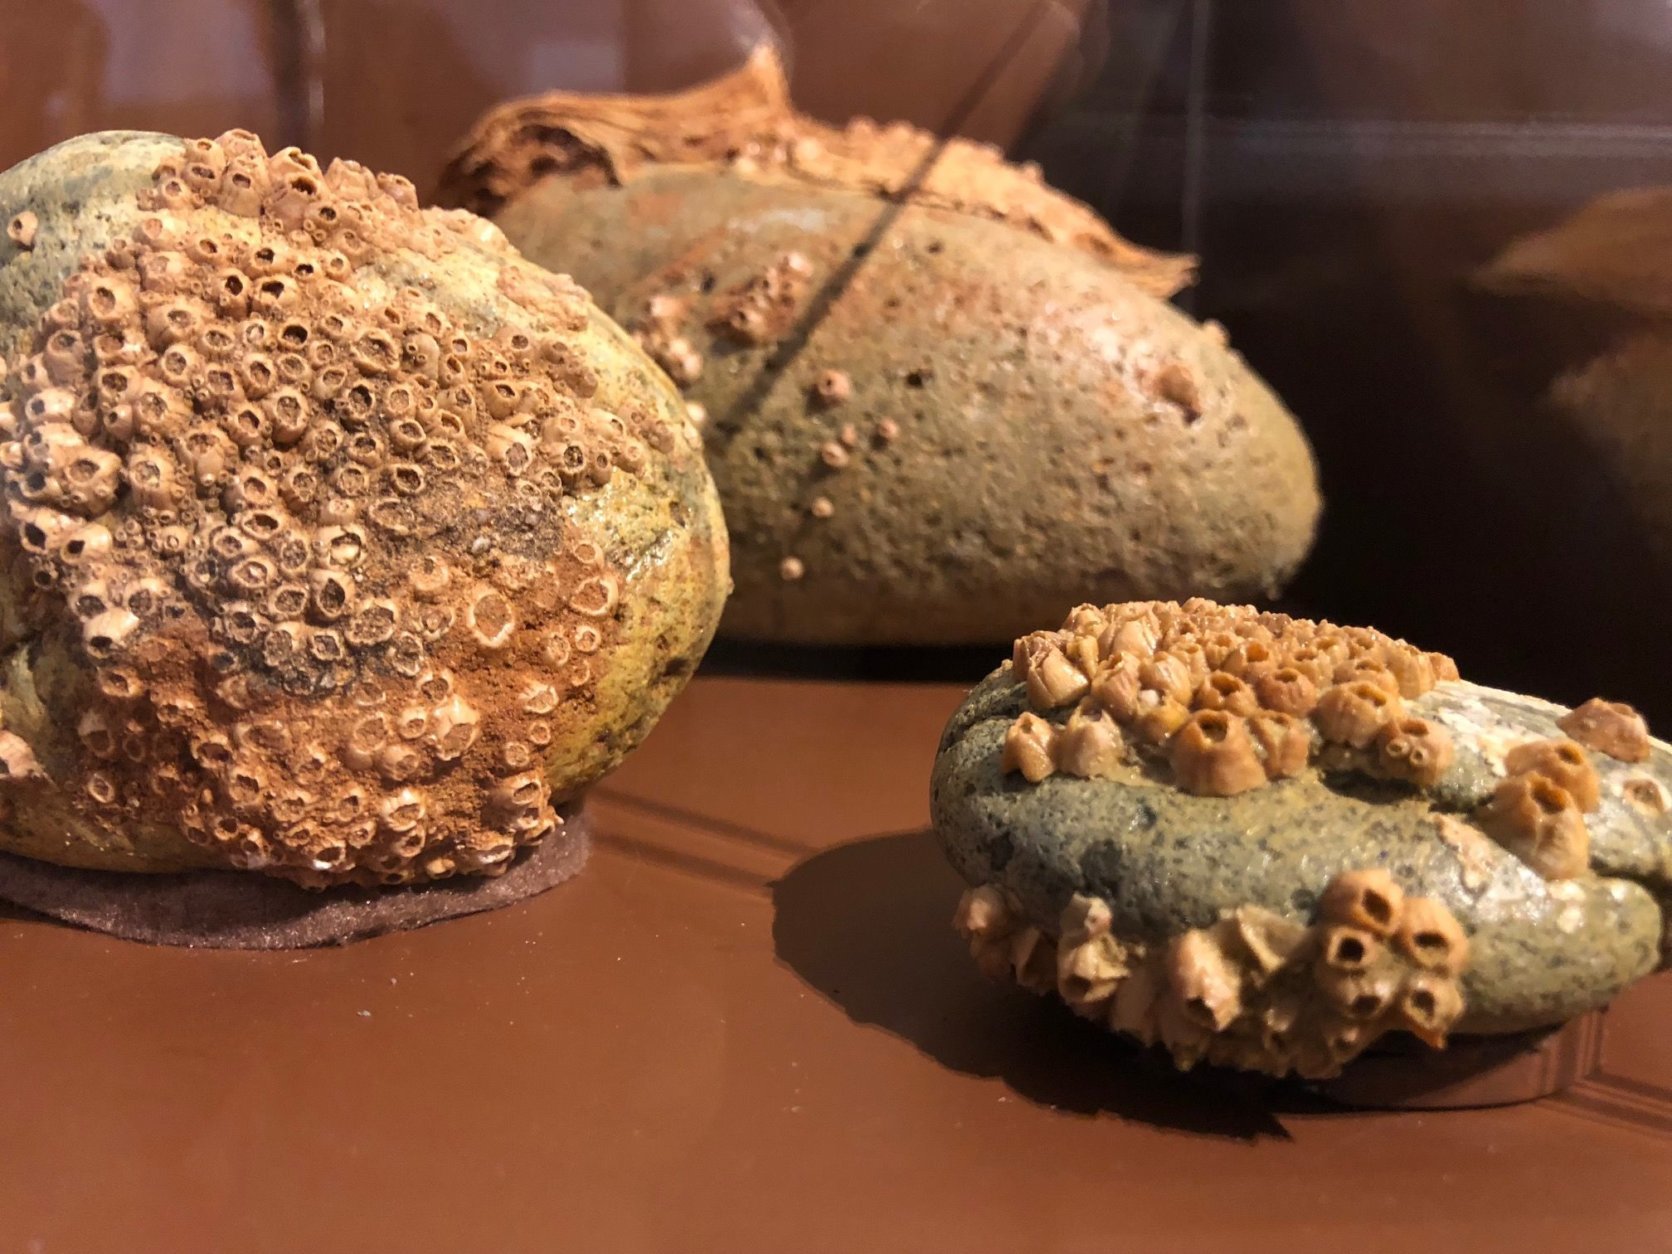 These are boulders with barnacles and oysters affixed to them that were collected at the top of a cliff as a result of uplift, which is a geologic process causing the Earth's crust to bulge along Angola's coast, lifting part of the seafloor out of the water. (WTOP/Kristi King)